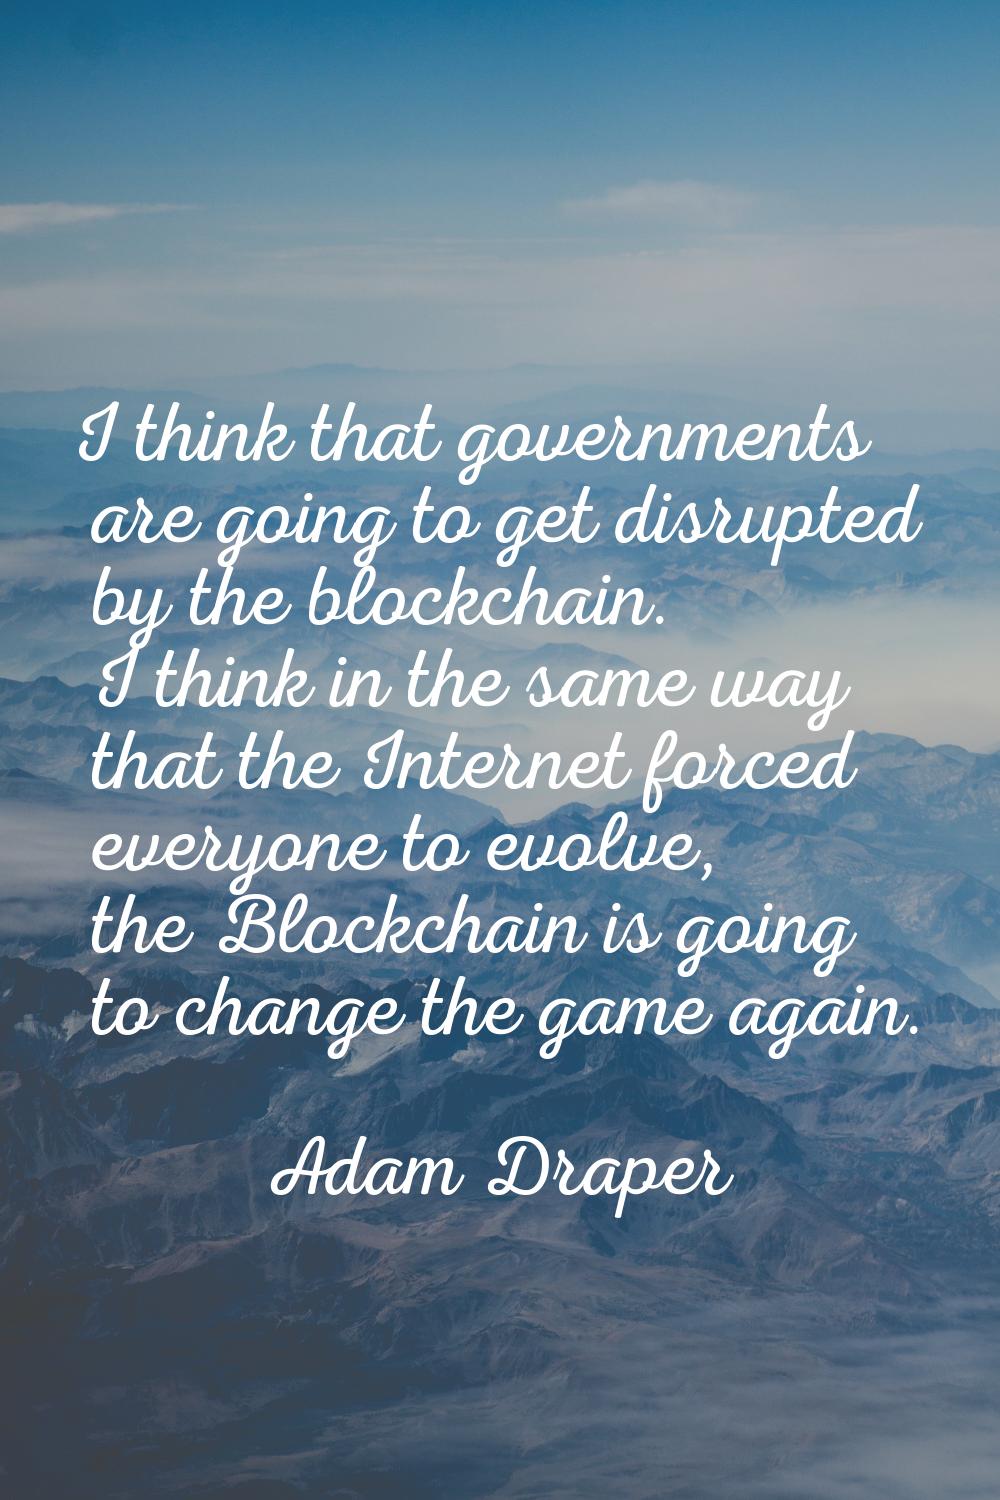 I think that governments are going to get disrupted by the blockchain. I think in the same way that